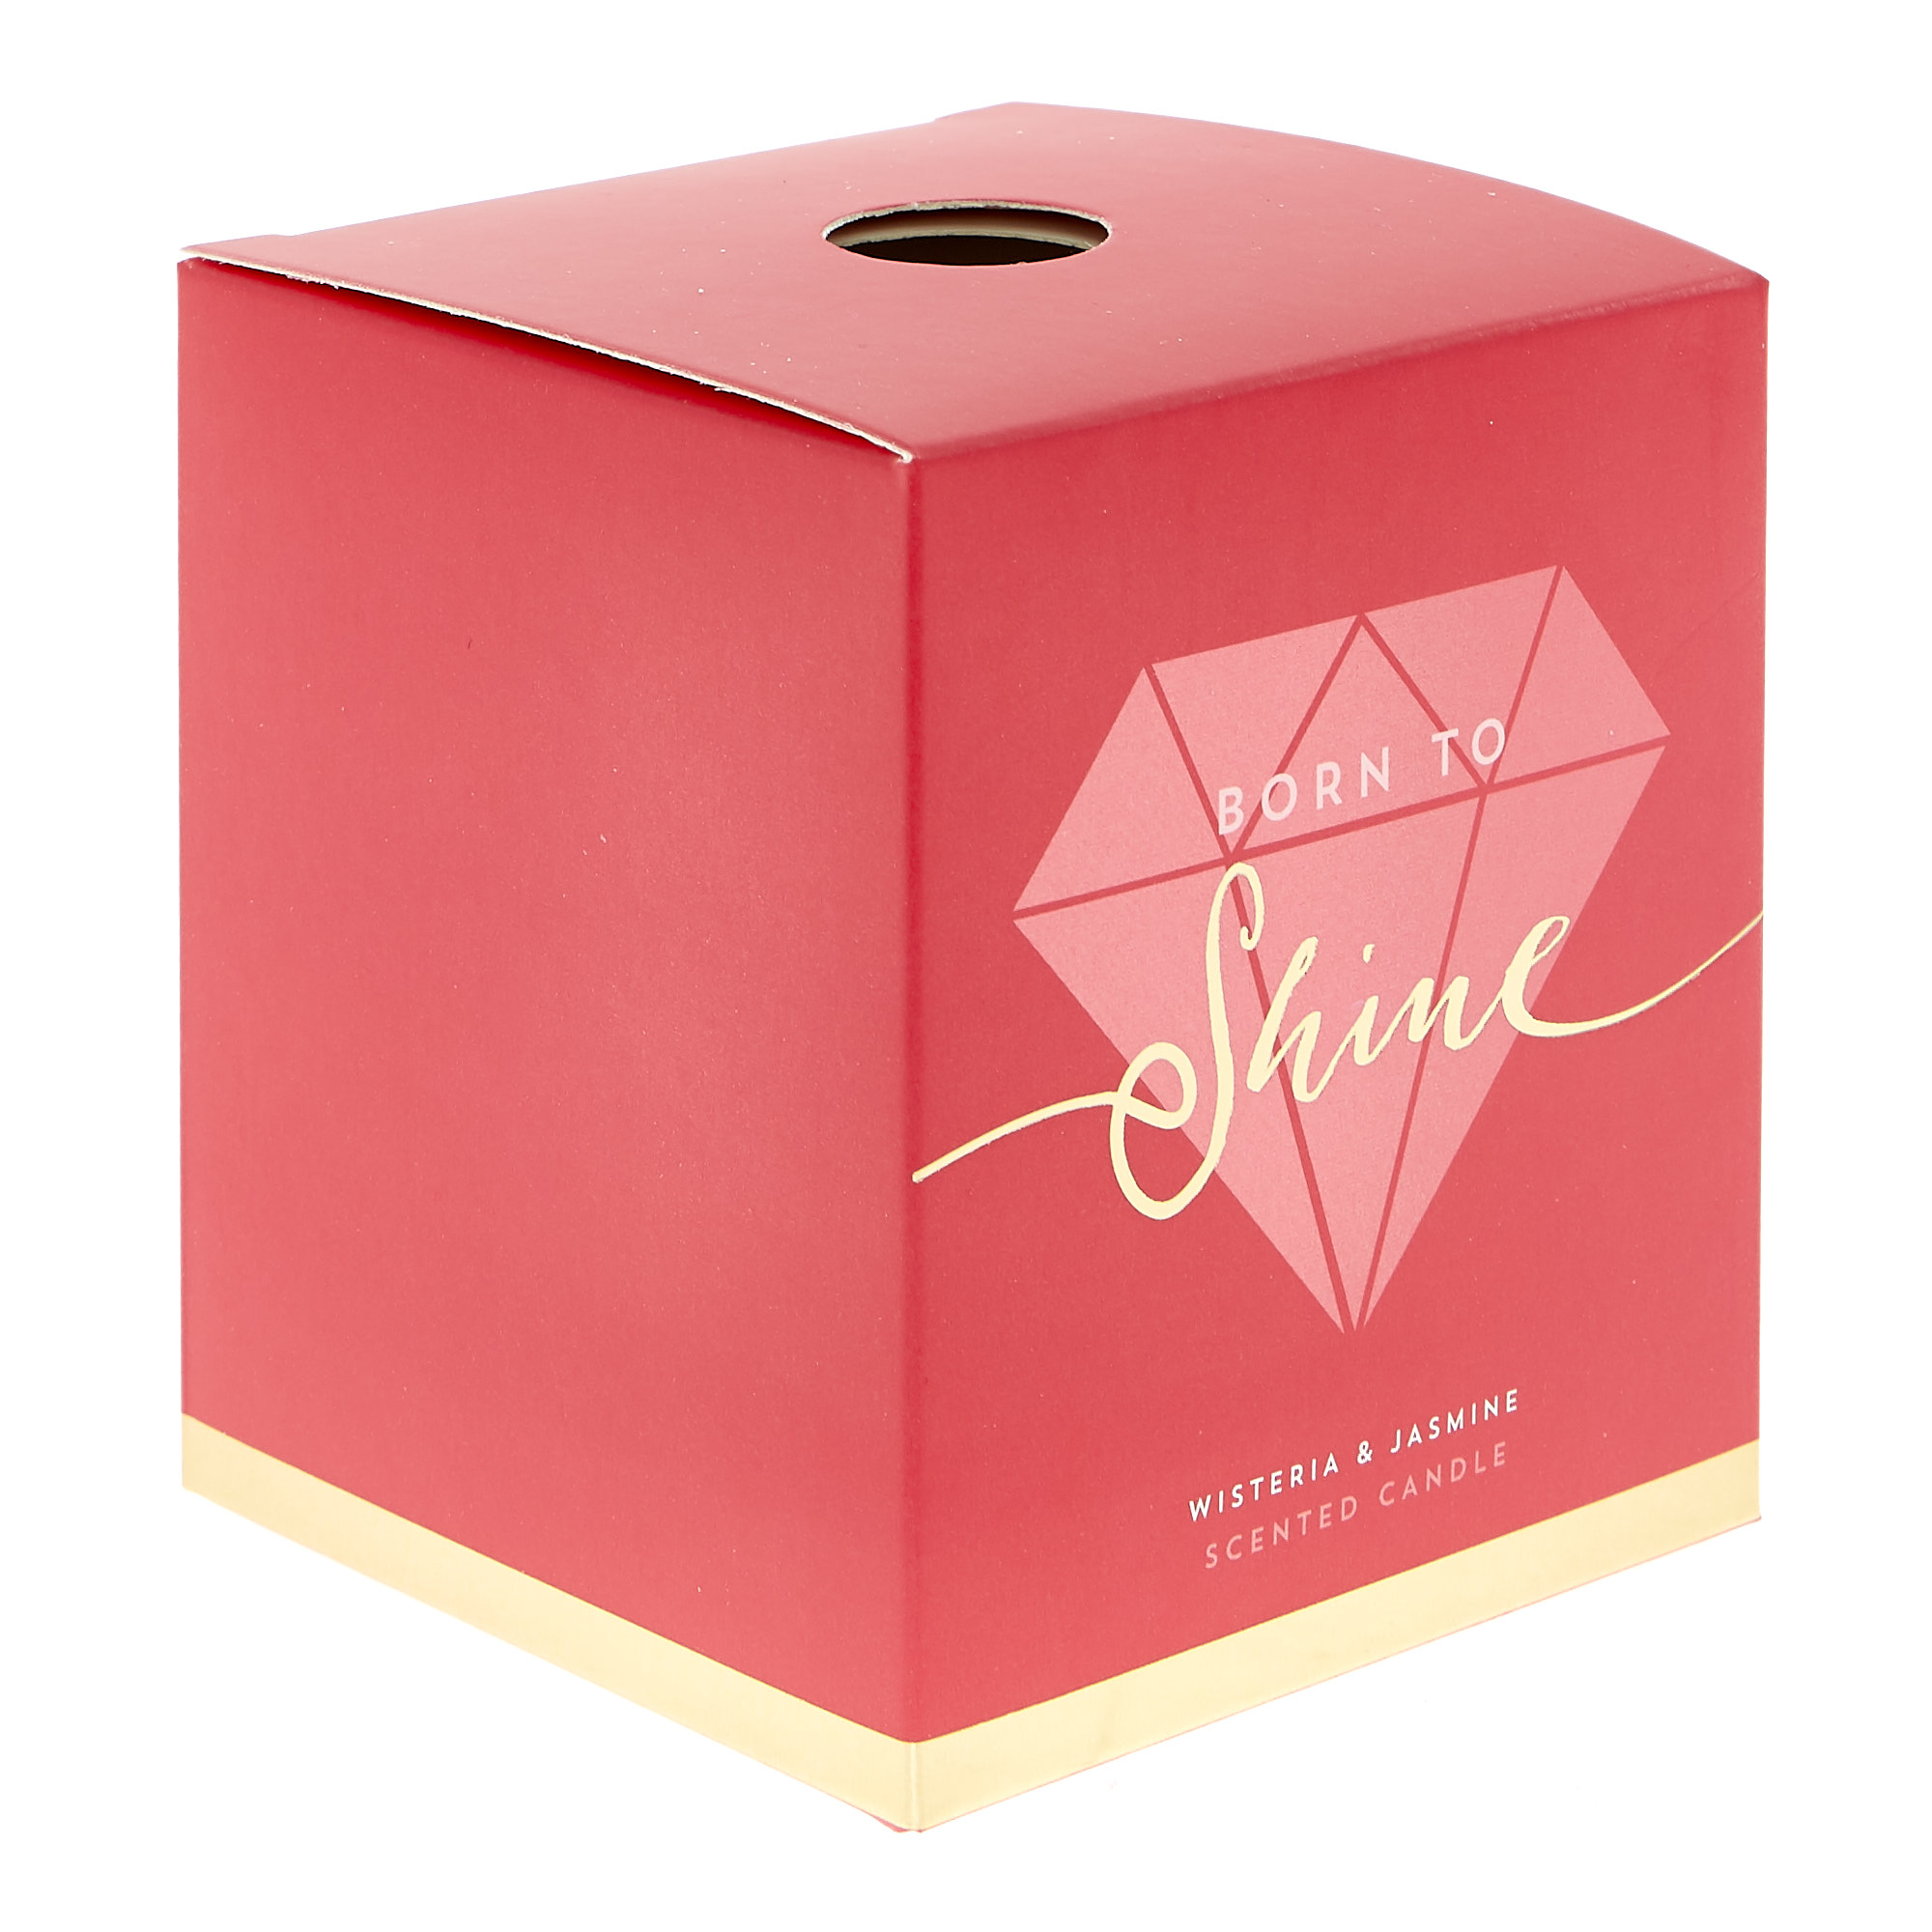 Born to Shine Boxed Candle